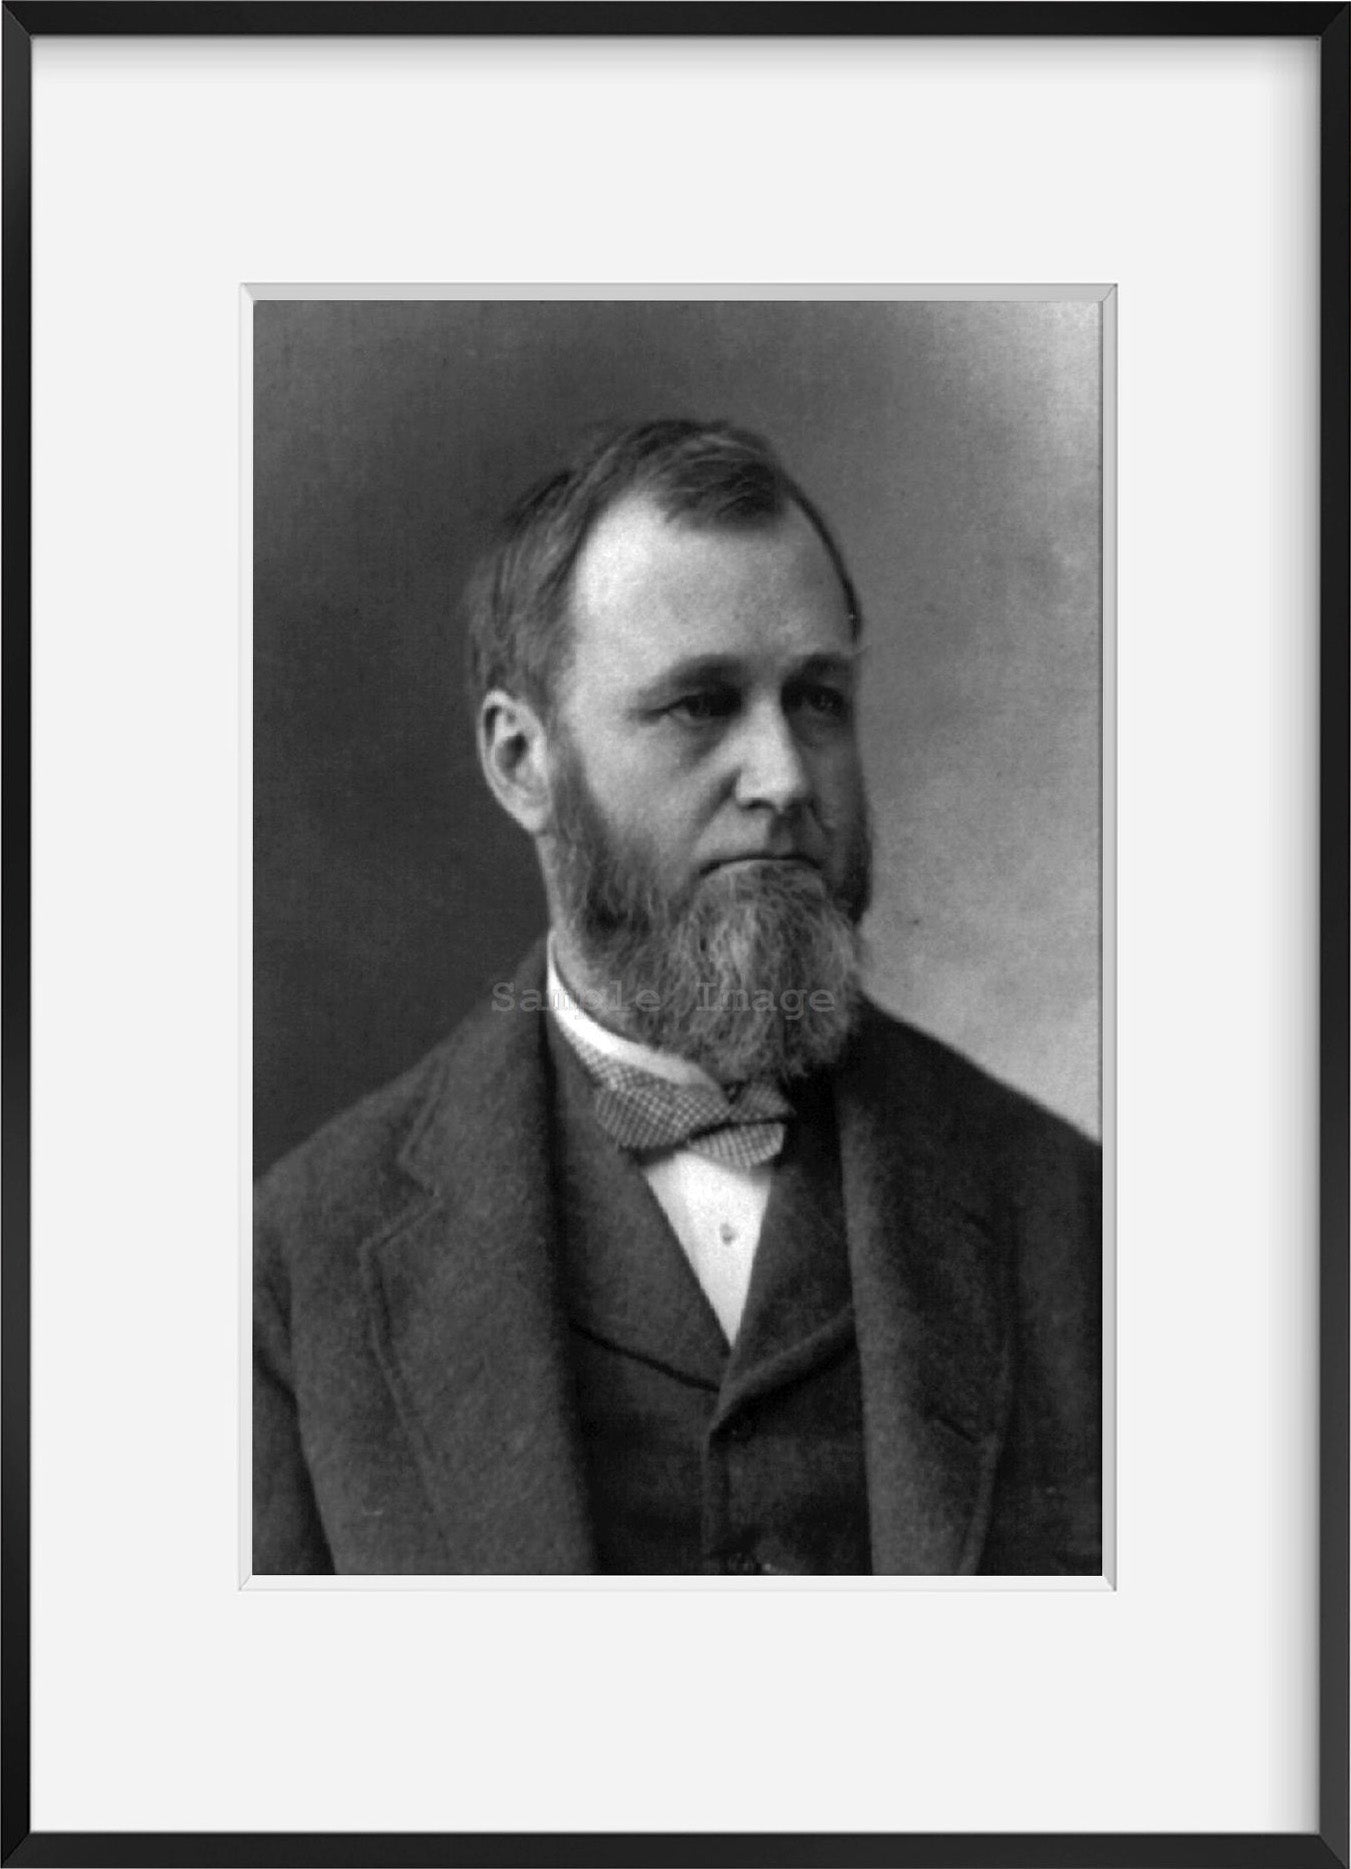 between 1892 and 1903 photograph of George Shiras, Jr., Associate Justice, Supre